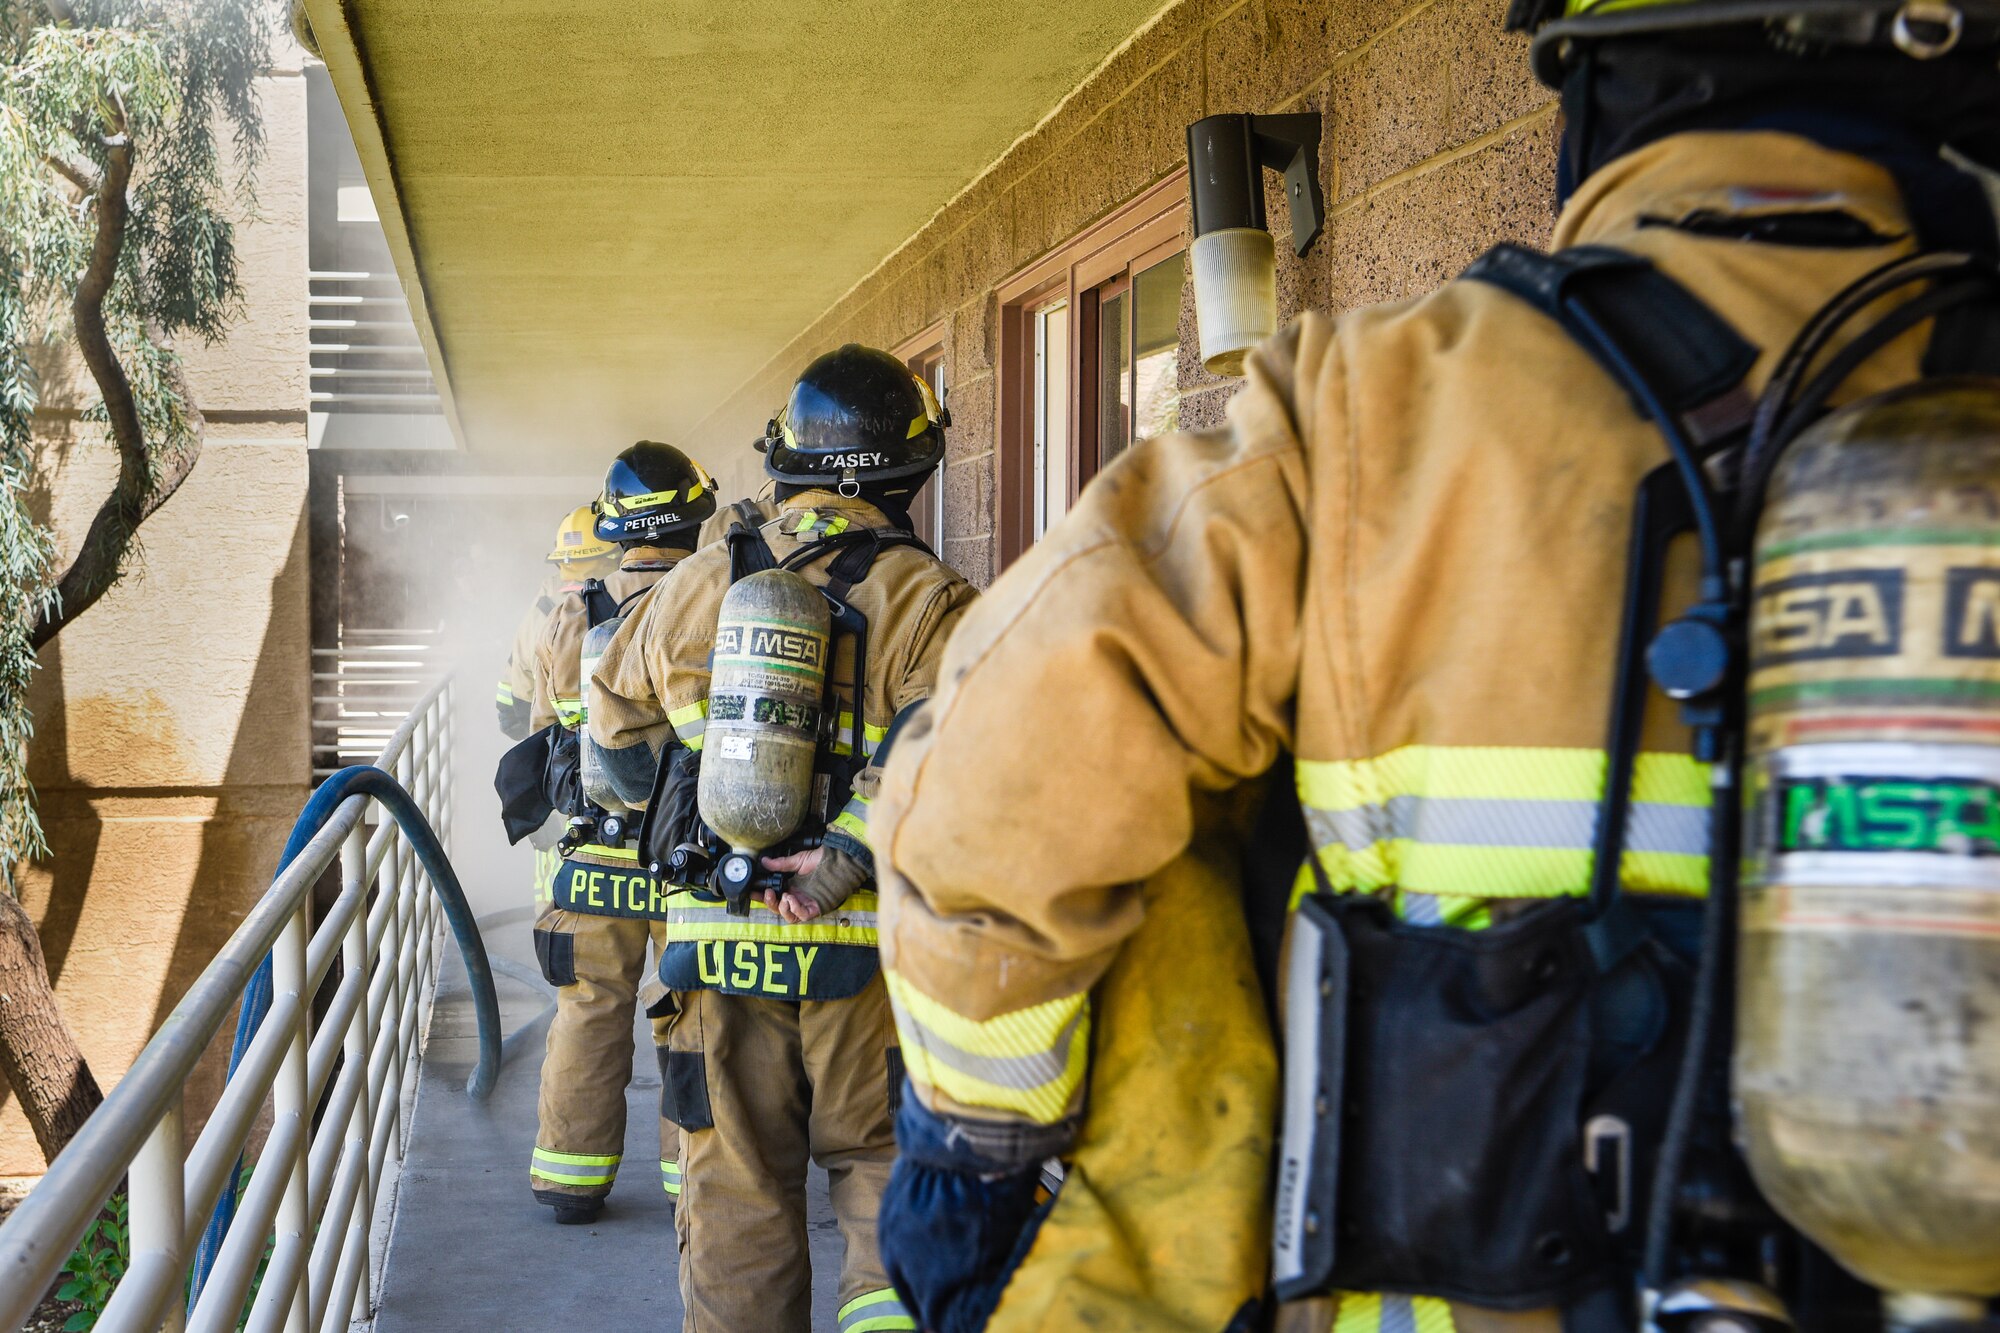 A line of firefighters prepare to enter a room during a joint training exercise May 3, 2019, at Luke Air Force Base, Ariz. The Luke AFB Fire Department responds to emergencies in the local community while local fire departments respond to emergency calls on base. Multi-company standard trainings such as these help firefighters practice basic operating procedures together so they can be effectively used in real world situations. (U.S. Air Force photo by Airman 1st Class Zoie Cox)